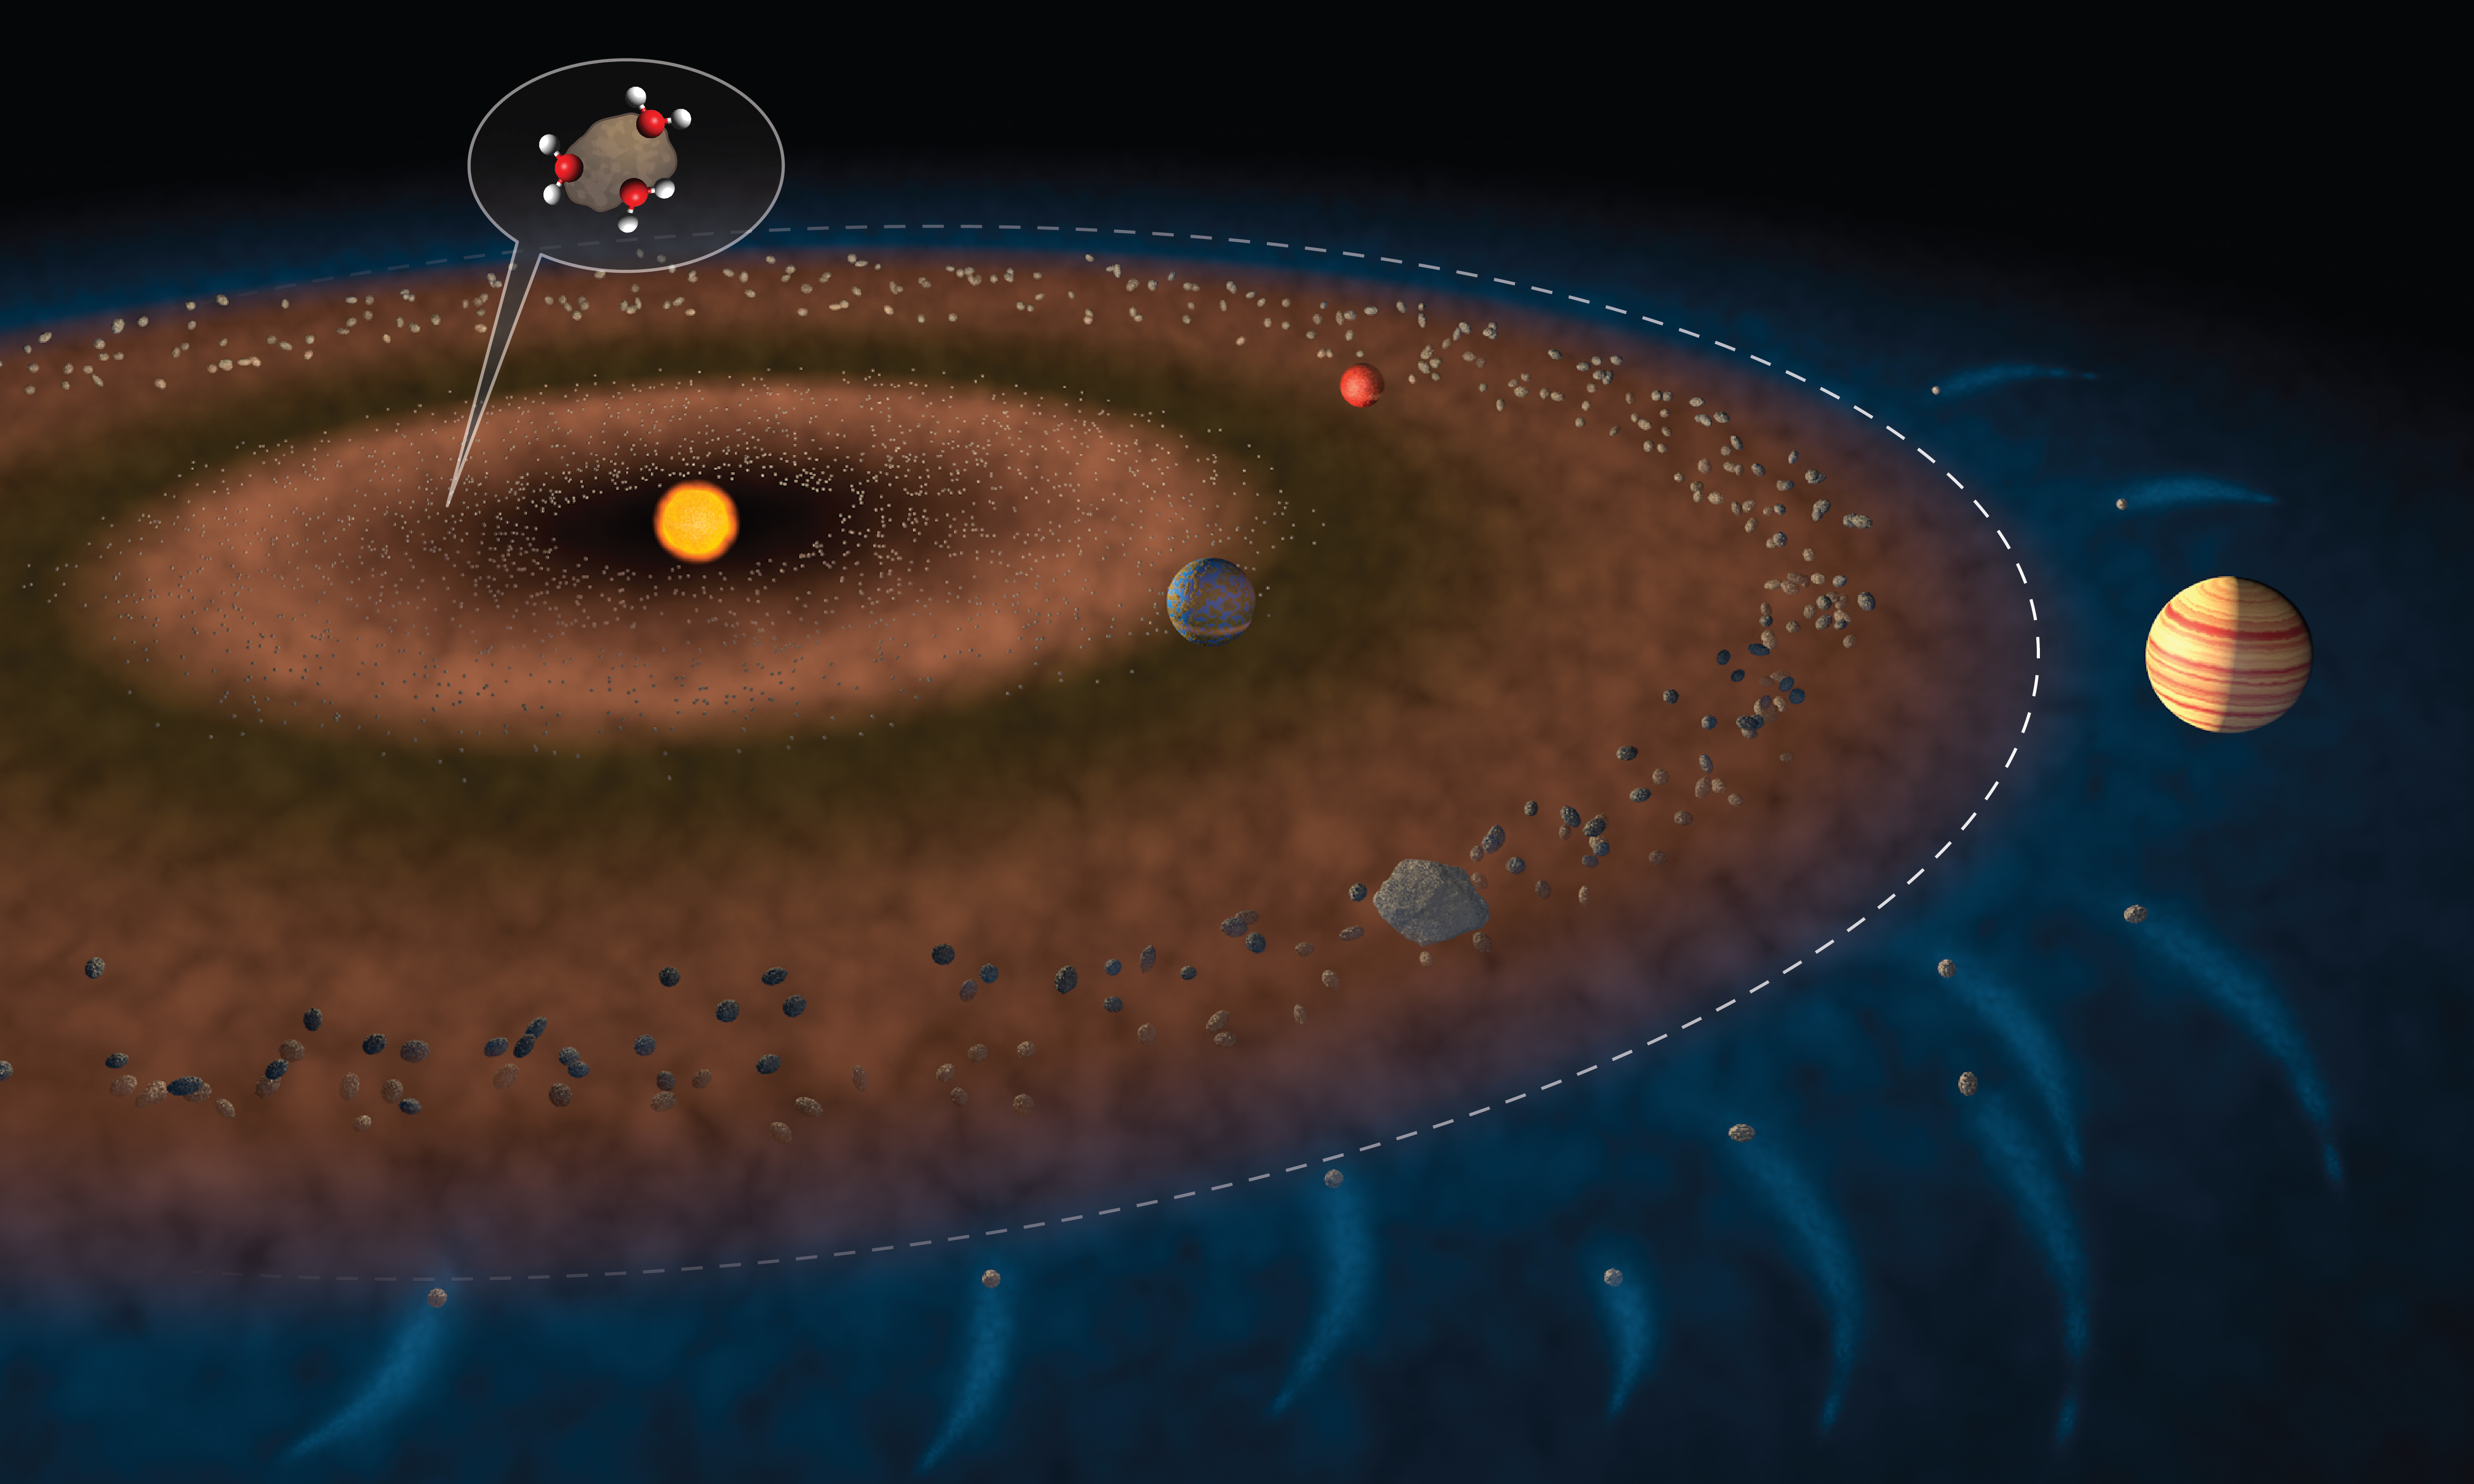 An illustration of the solar system and asteroid belt